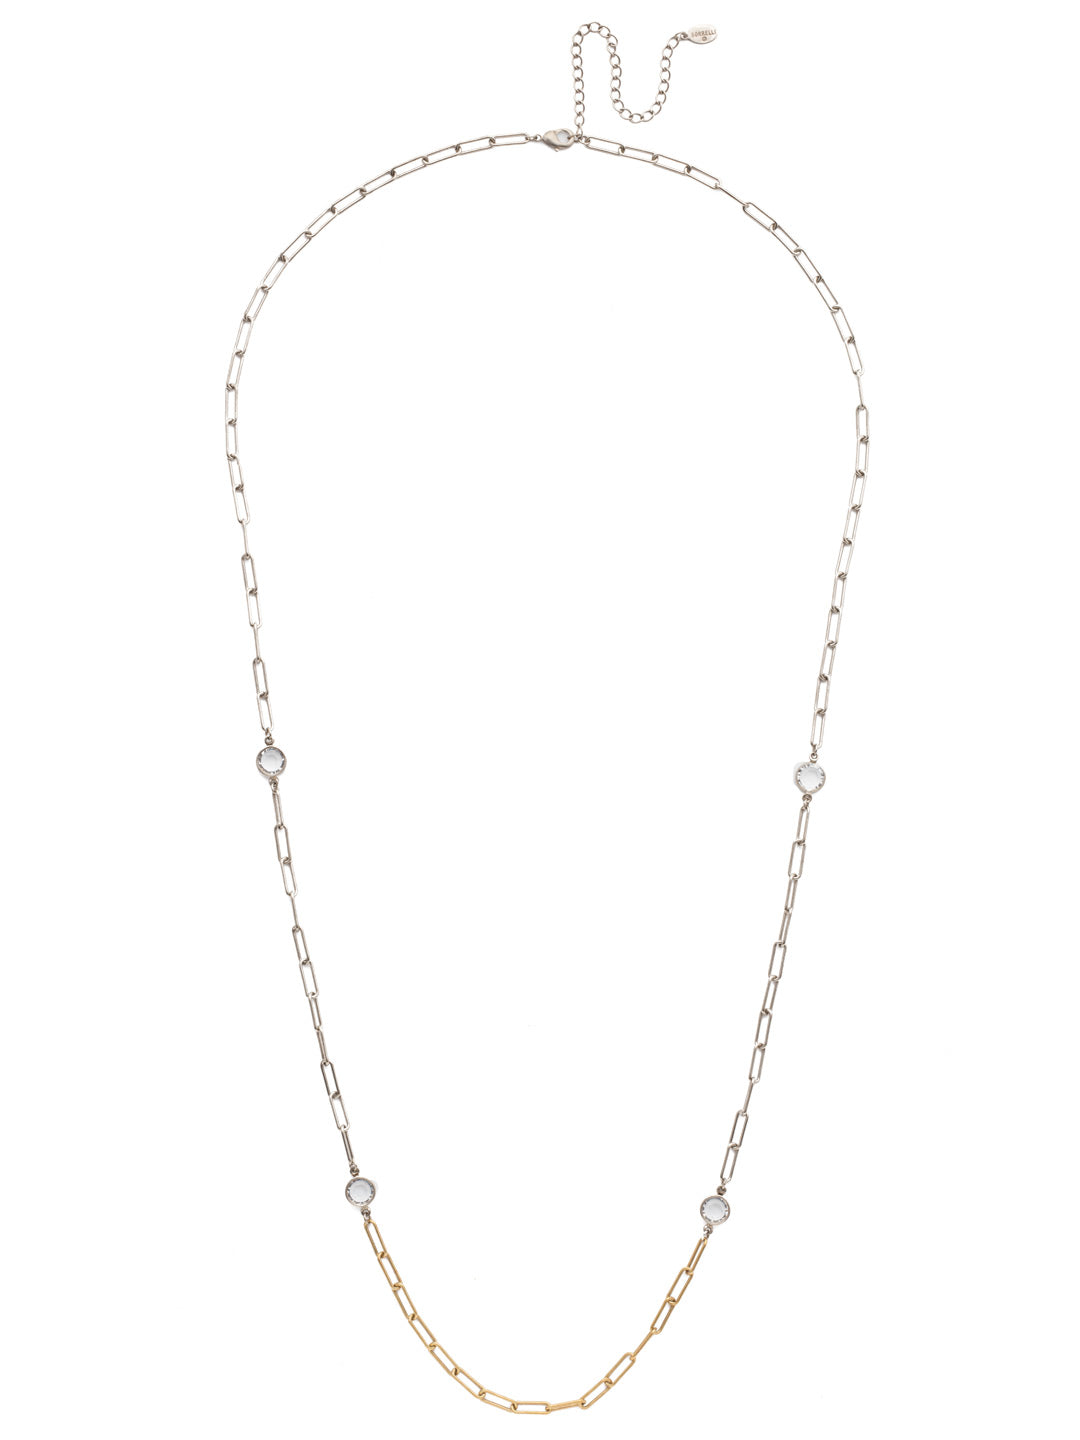 Ambrose Long Necklace - 4NES18MXCRY - <p>Go long on metallic links and pair them with freshwater pearls when you loop on our Ambrose Long Necklace. From Sorrelli's Crystal collection in our Mixed Metal finish.</p>